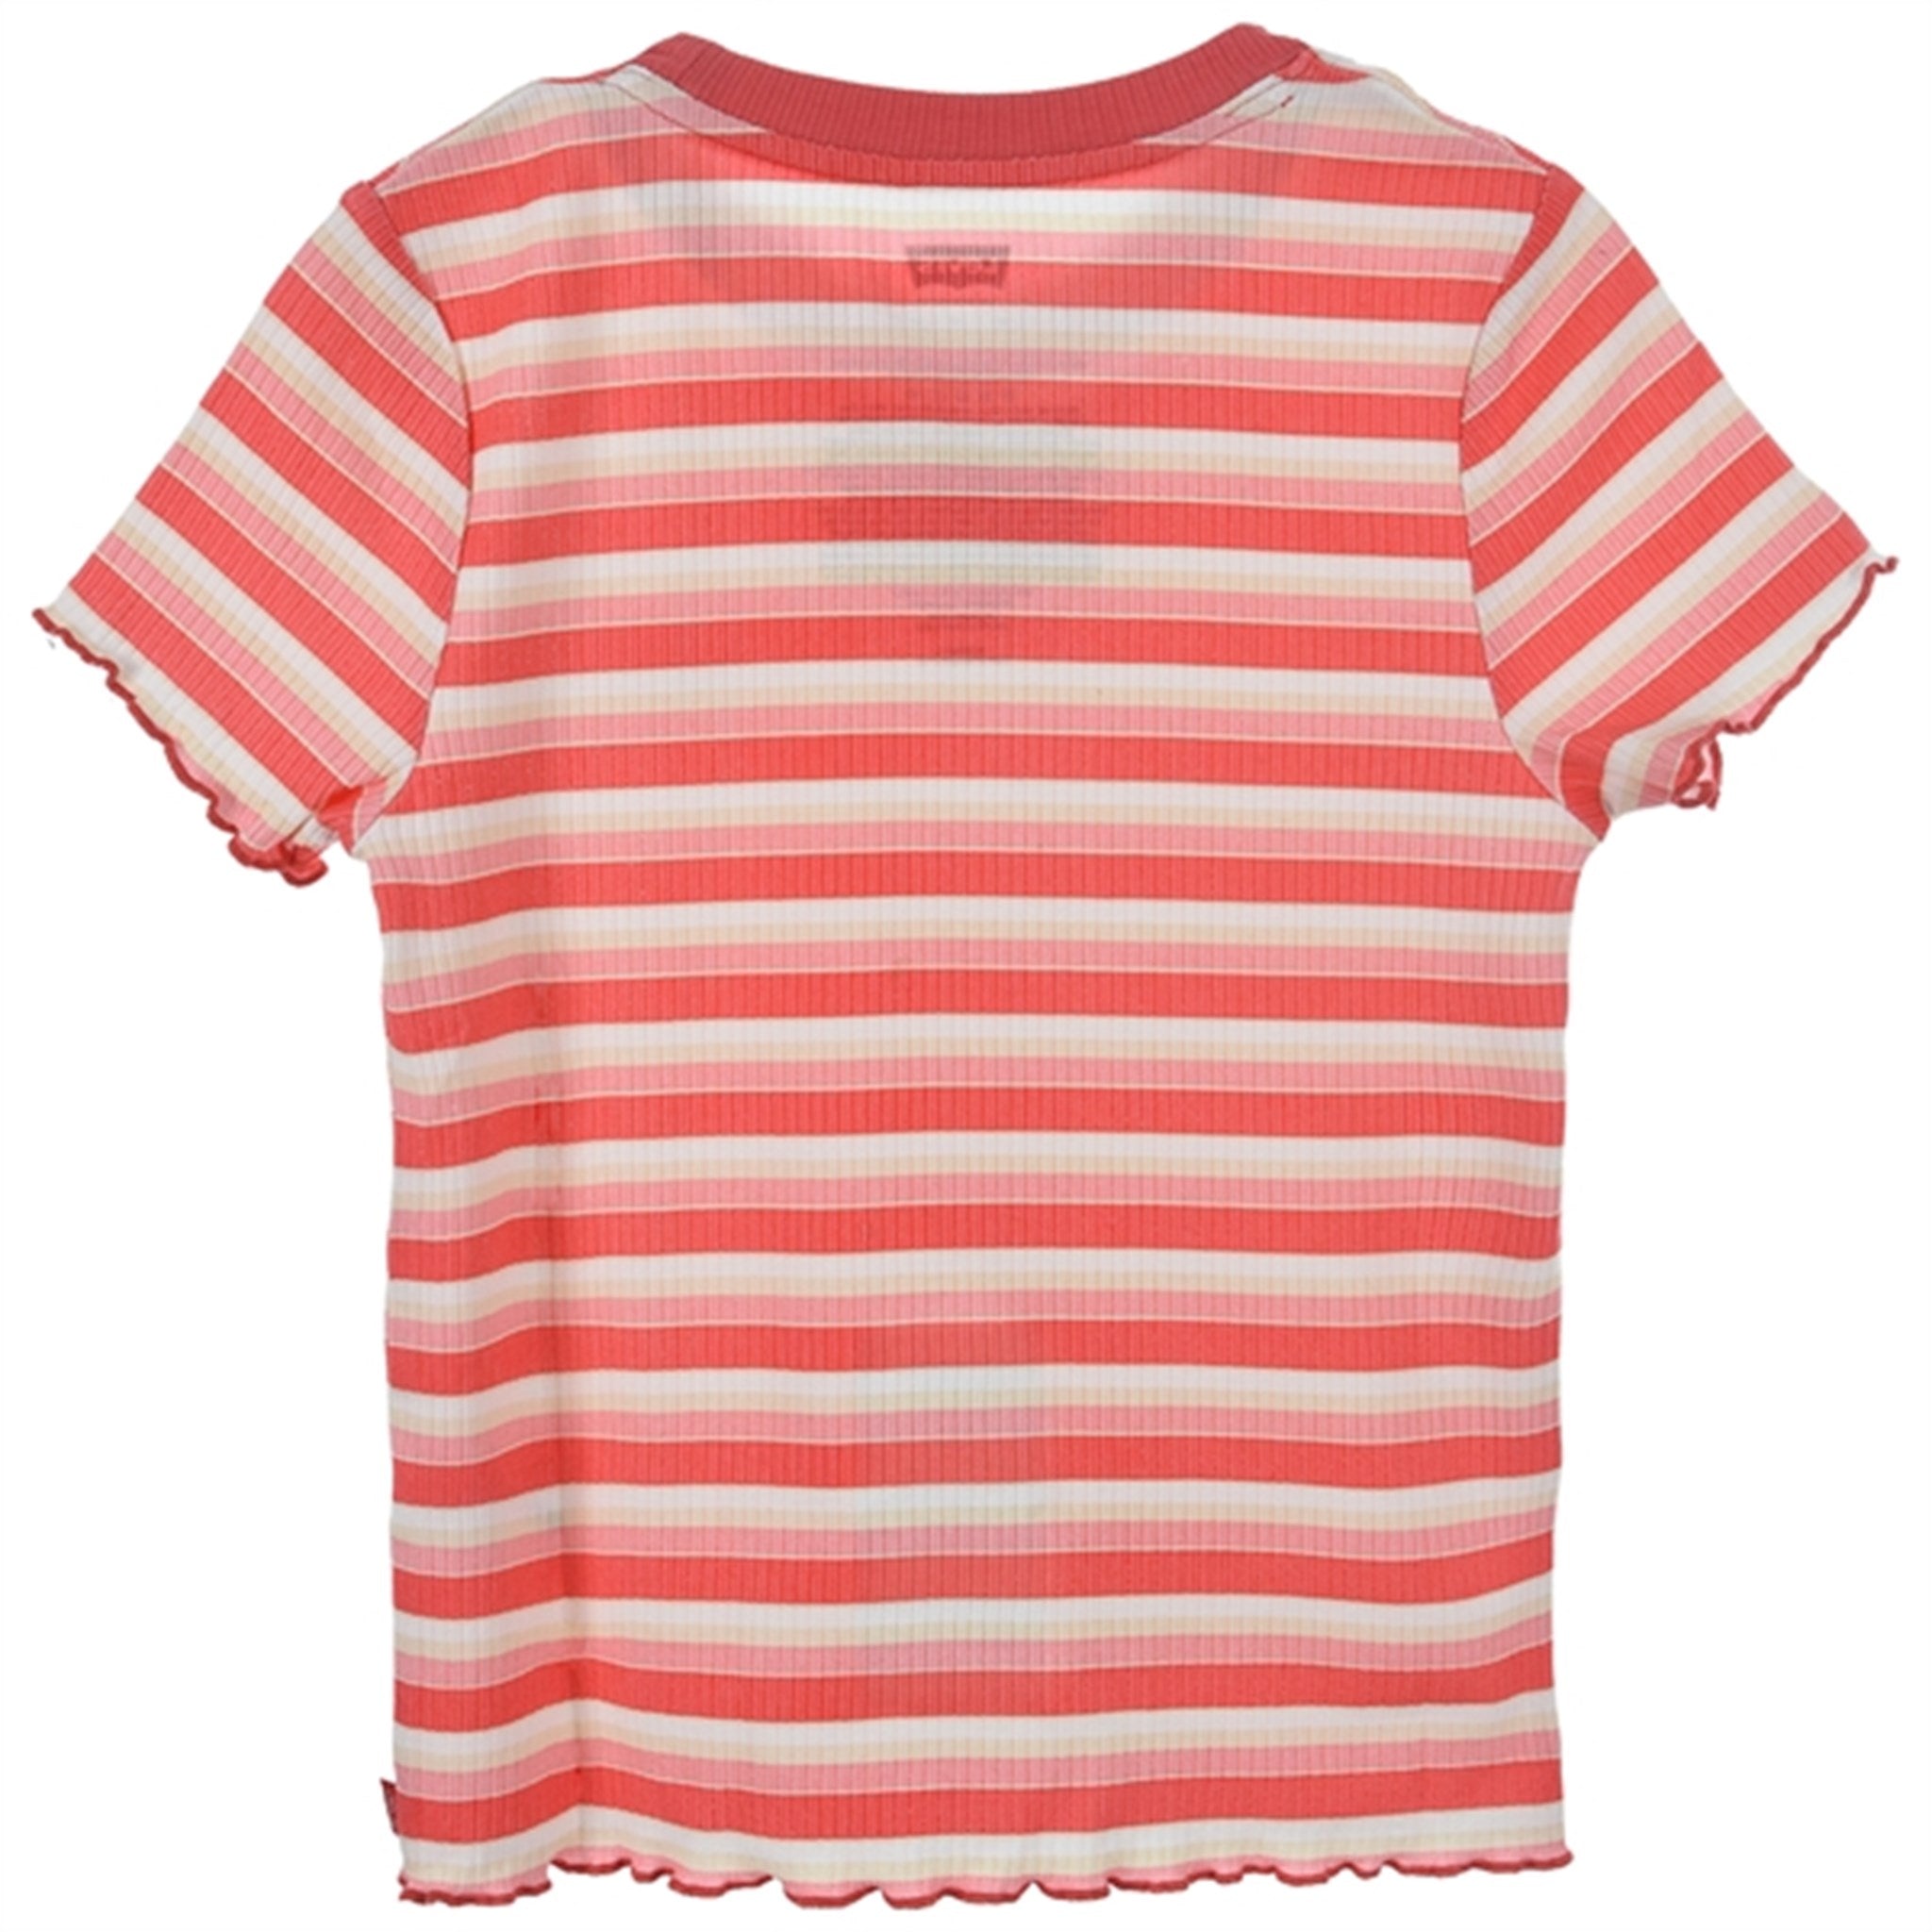 Levi's Striped Meet and Greet Topp Pink 4